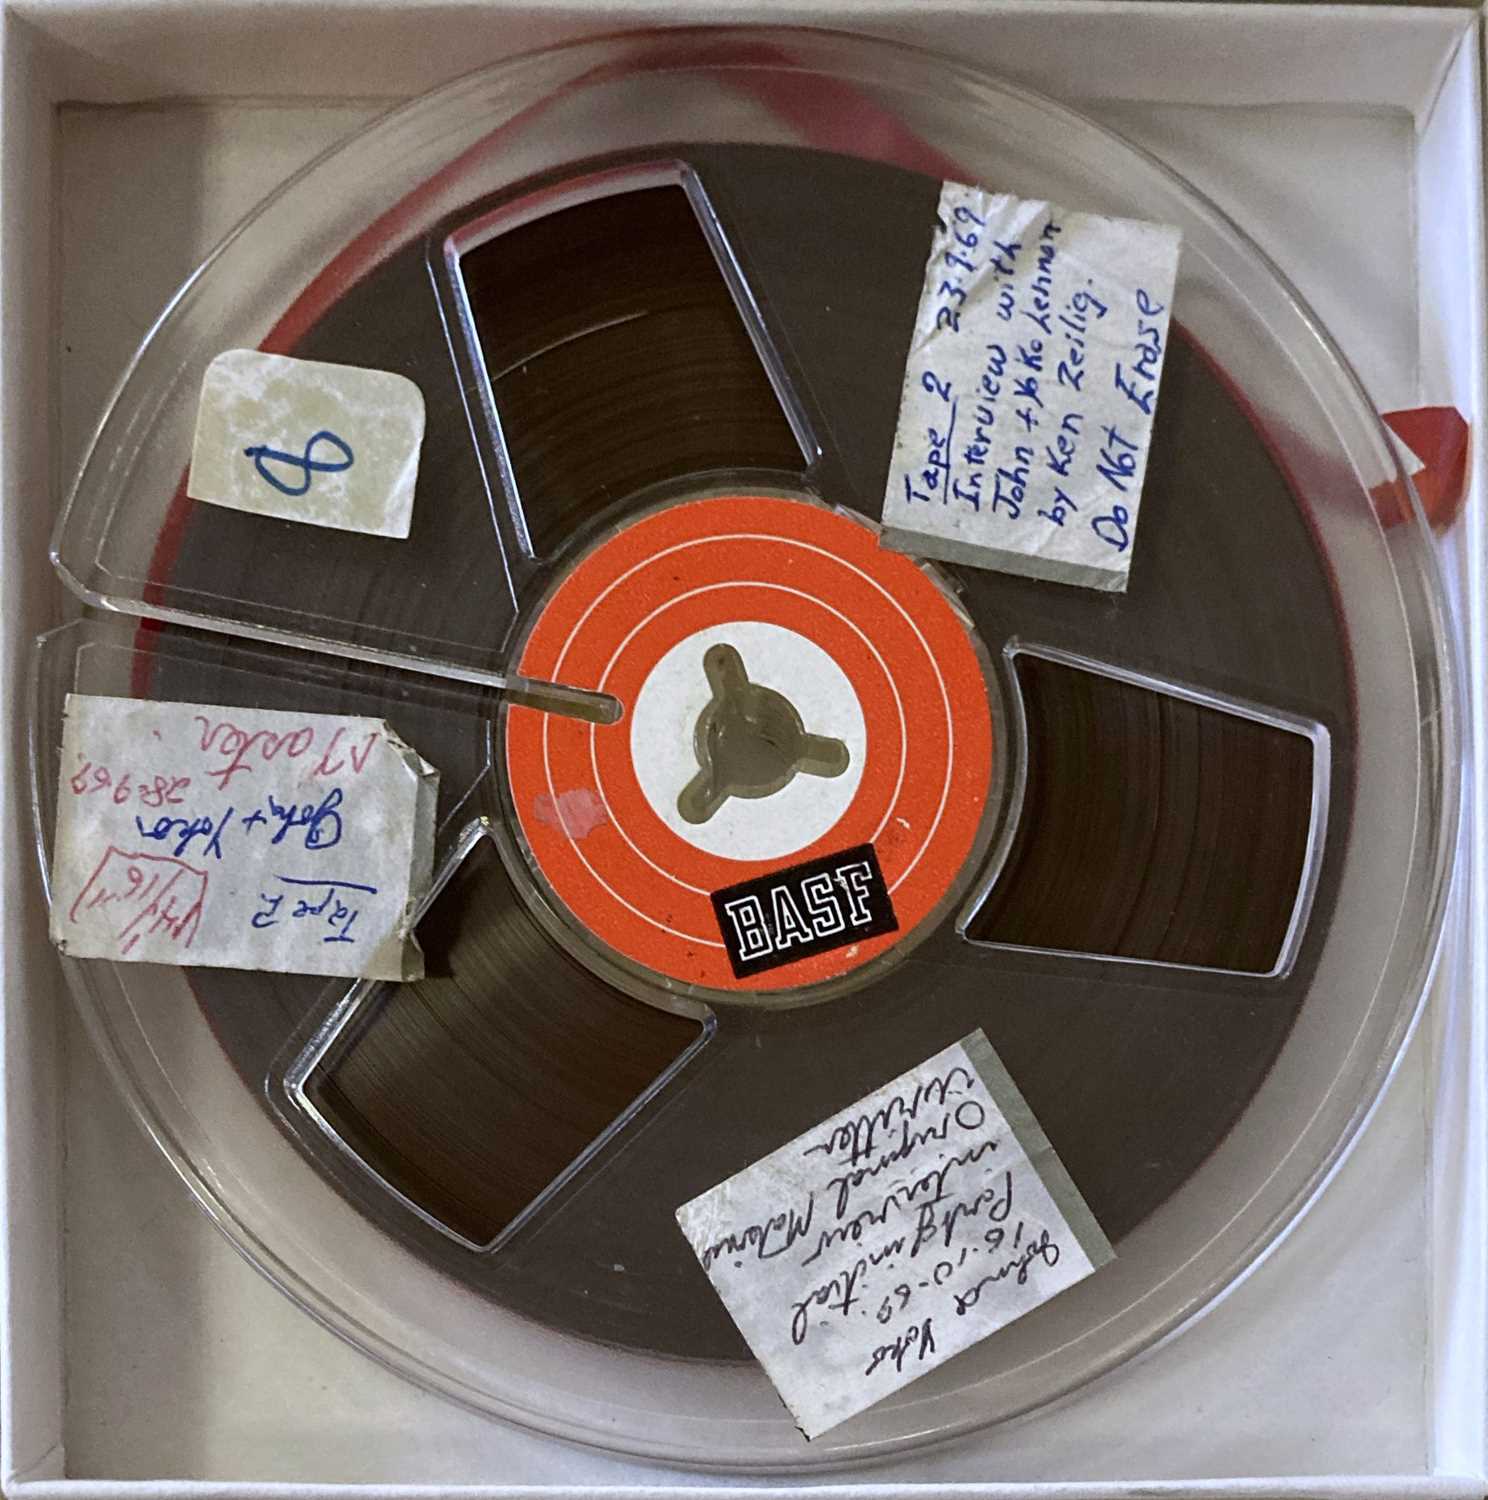 THE JOHN LENNON LOST INTERVIEWS FROM 1969/70 CONDUCTED BY KEN ZEILIG - Image 6 of 33